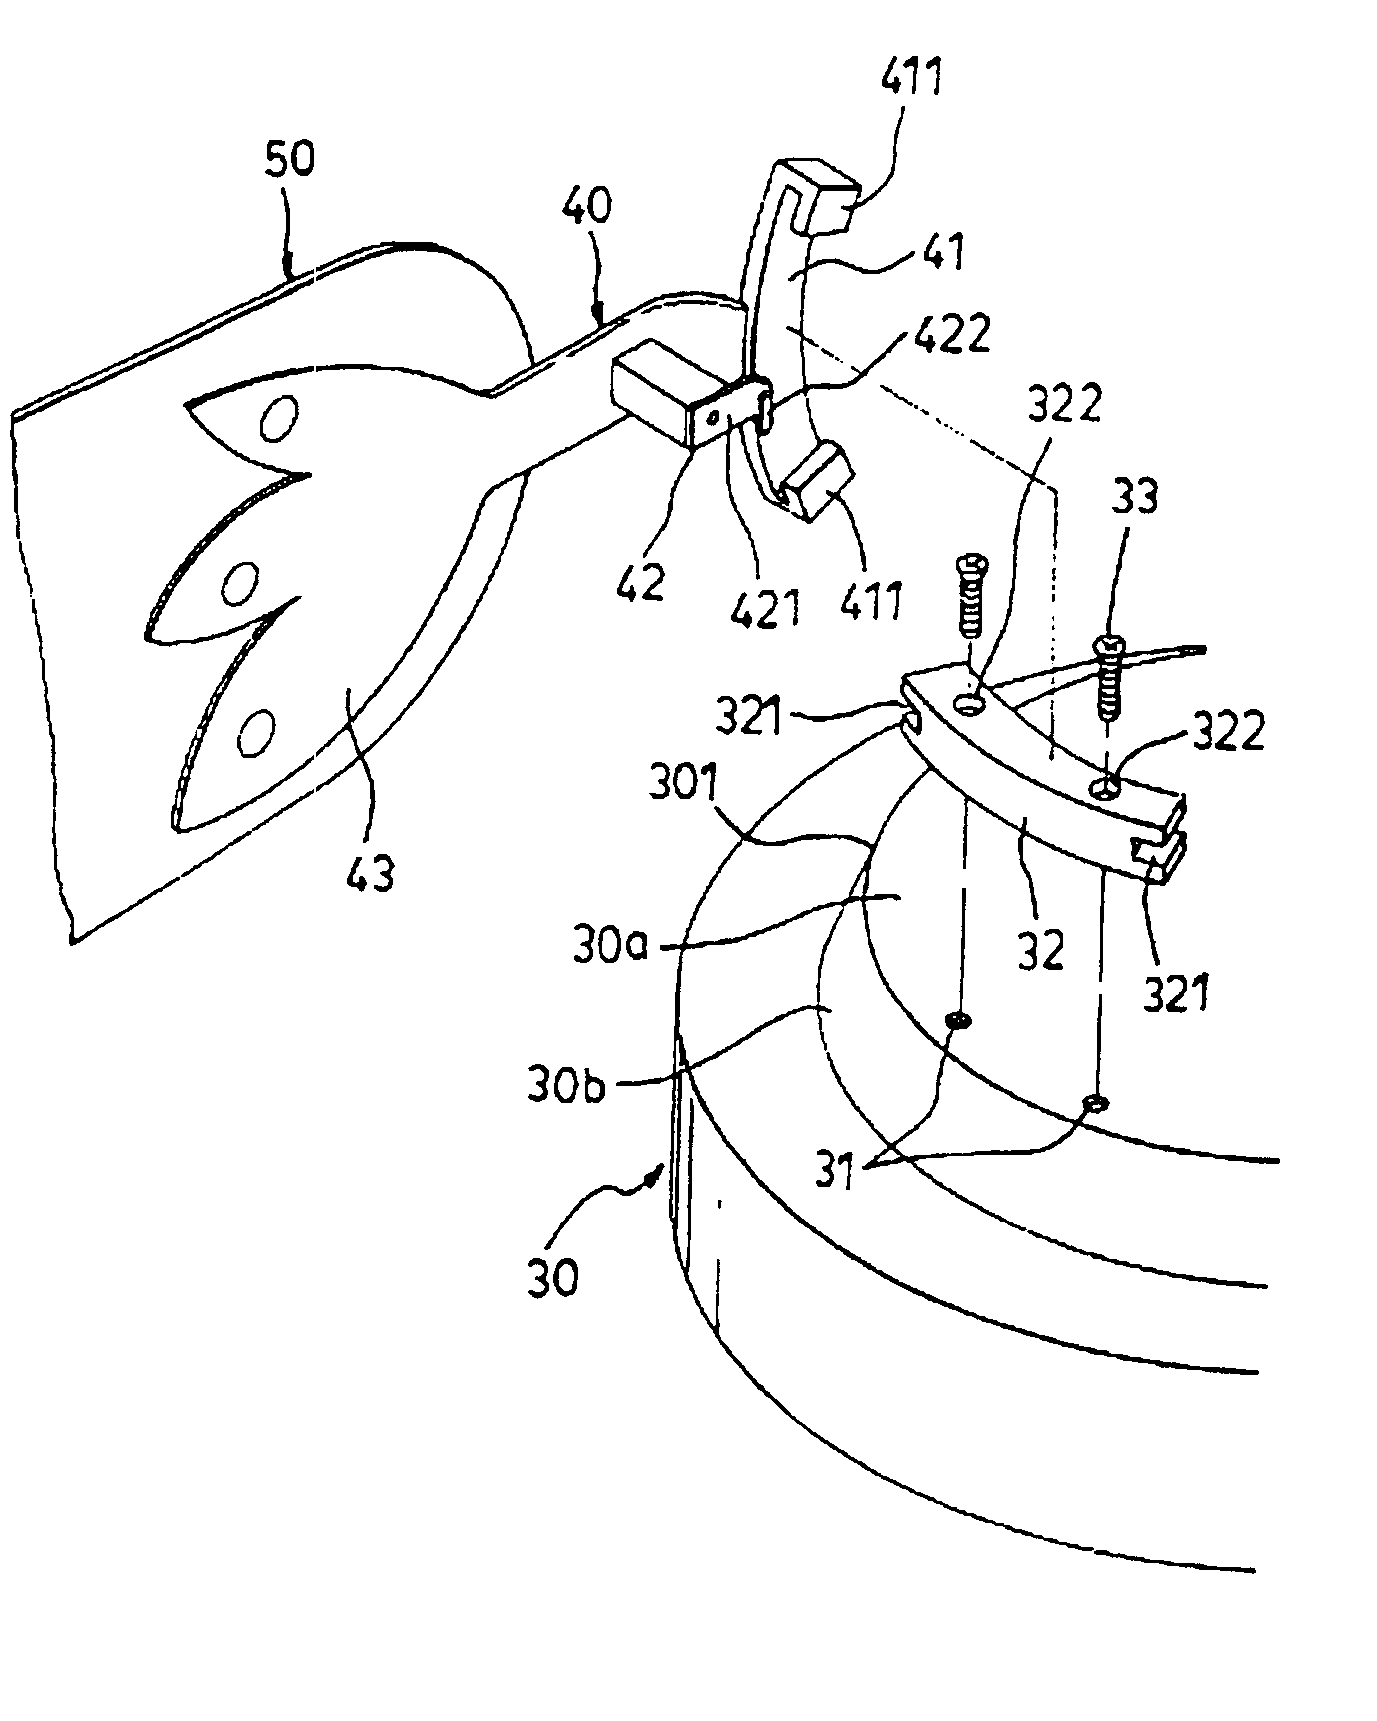 Connecting device for connecting a fan blade to a rotor of a motor of a ceiling fan